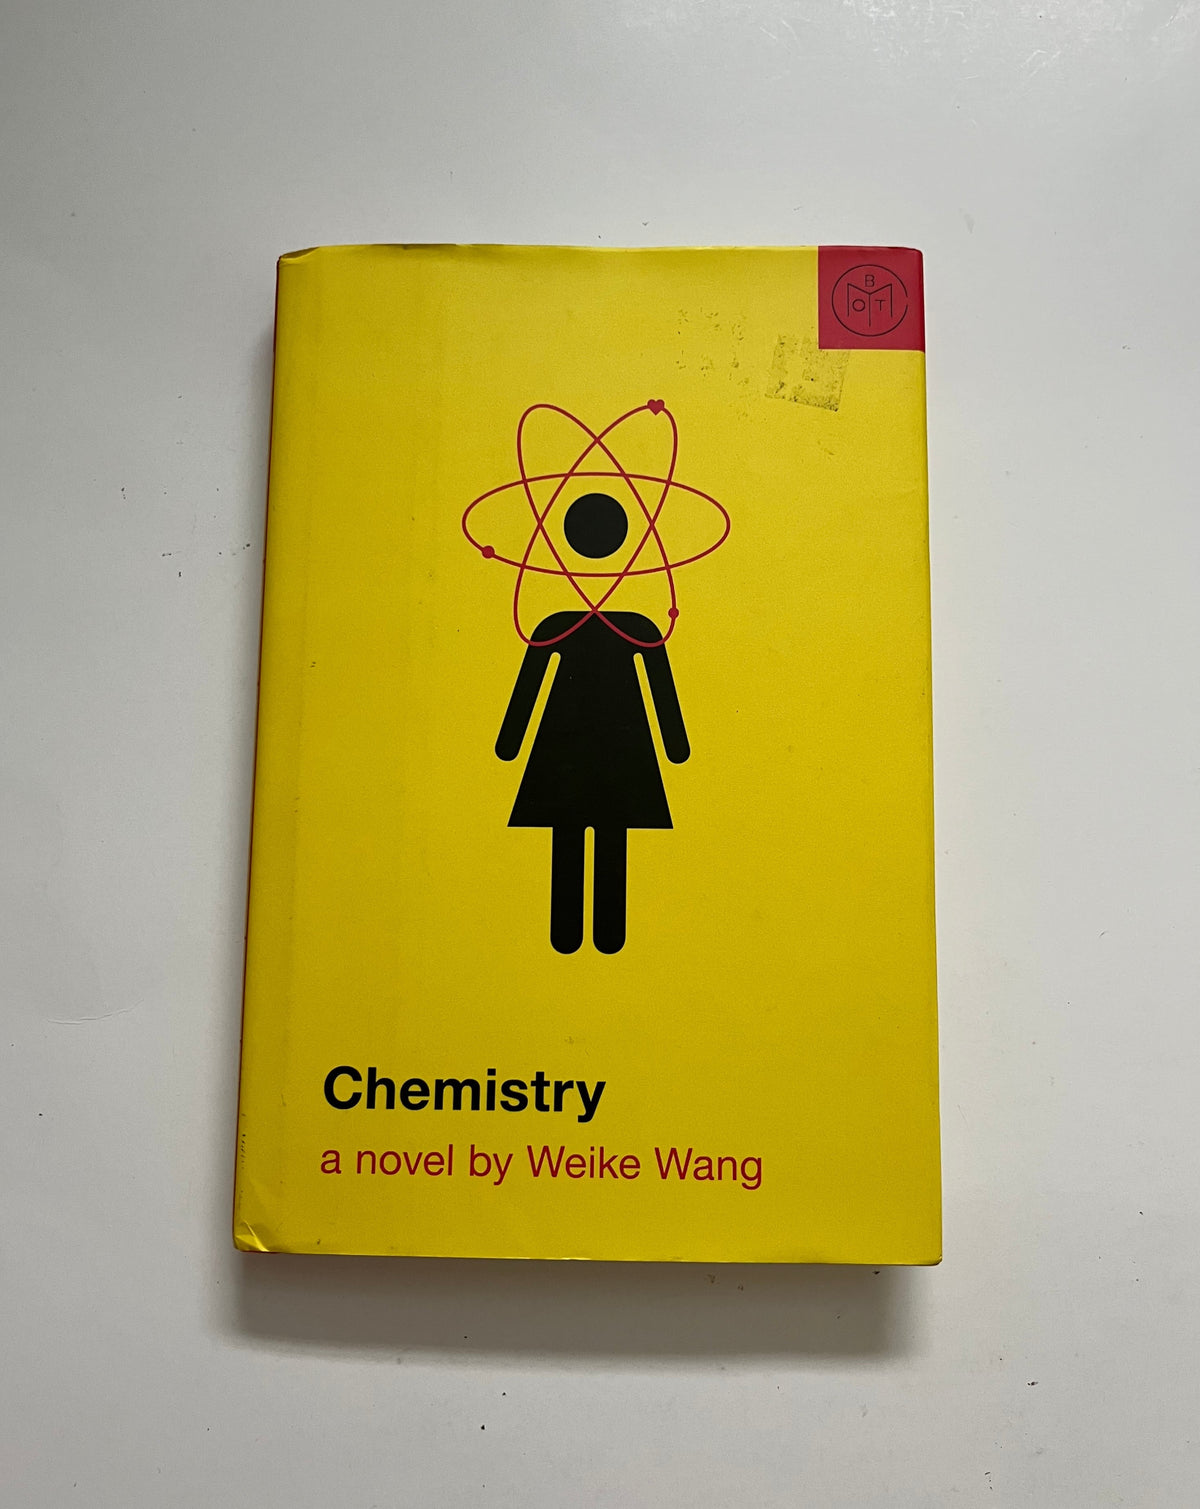 Chemistry by Weike Wang